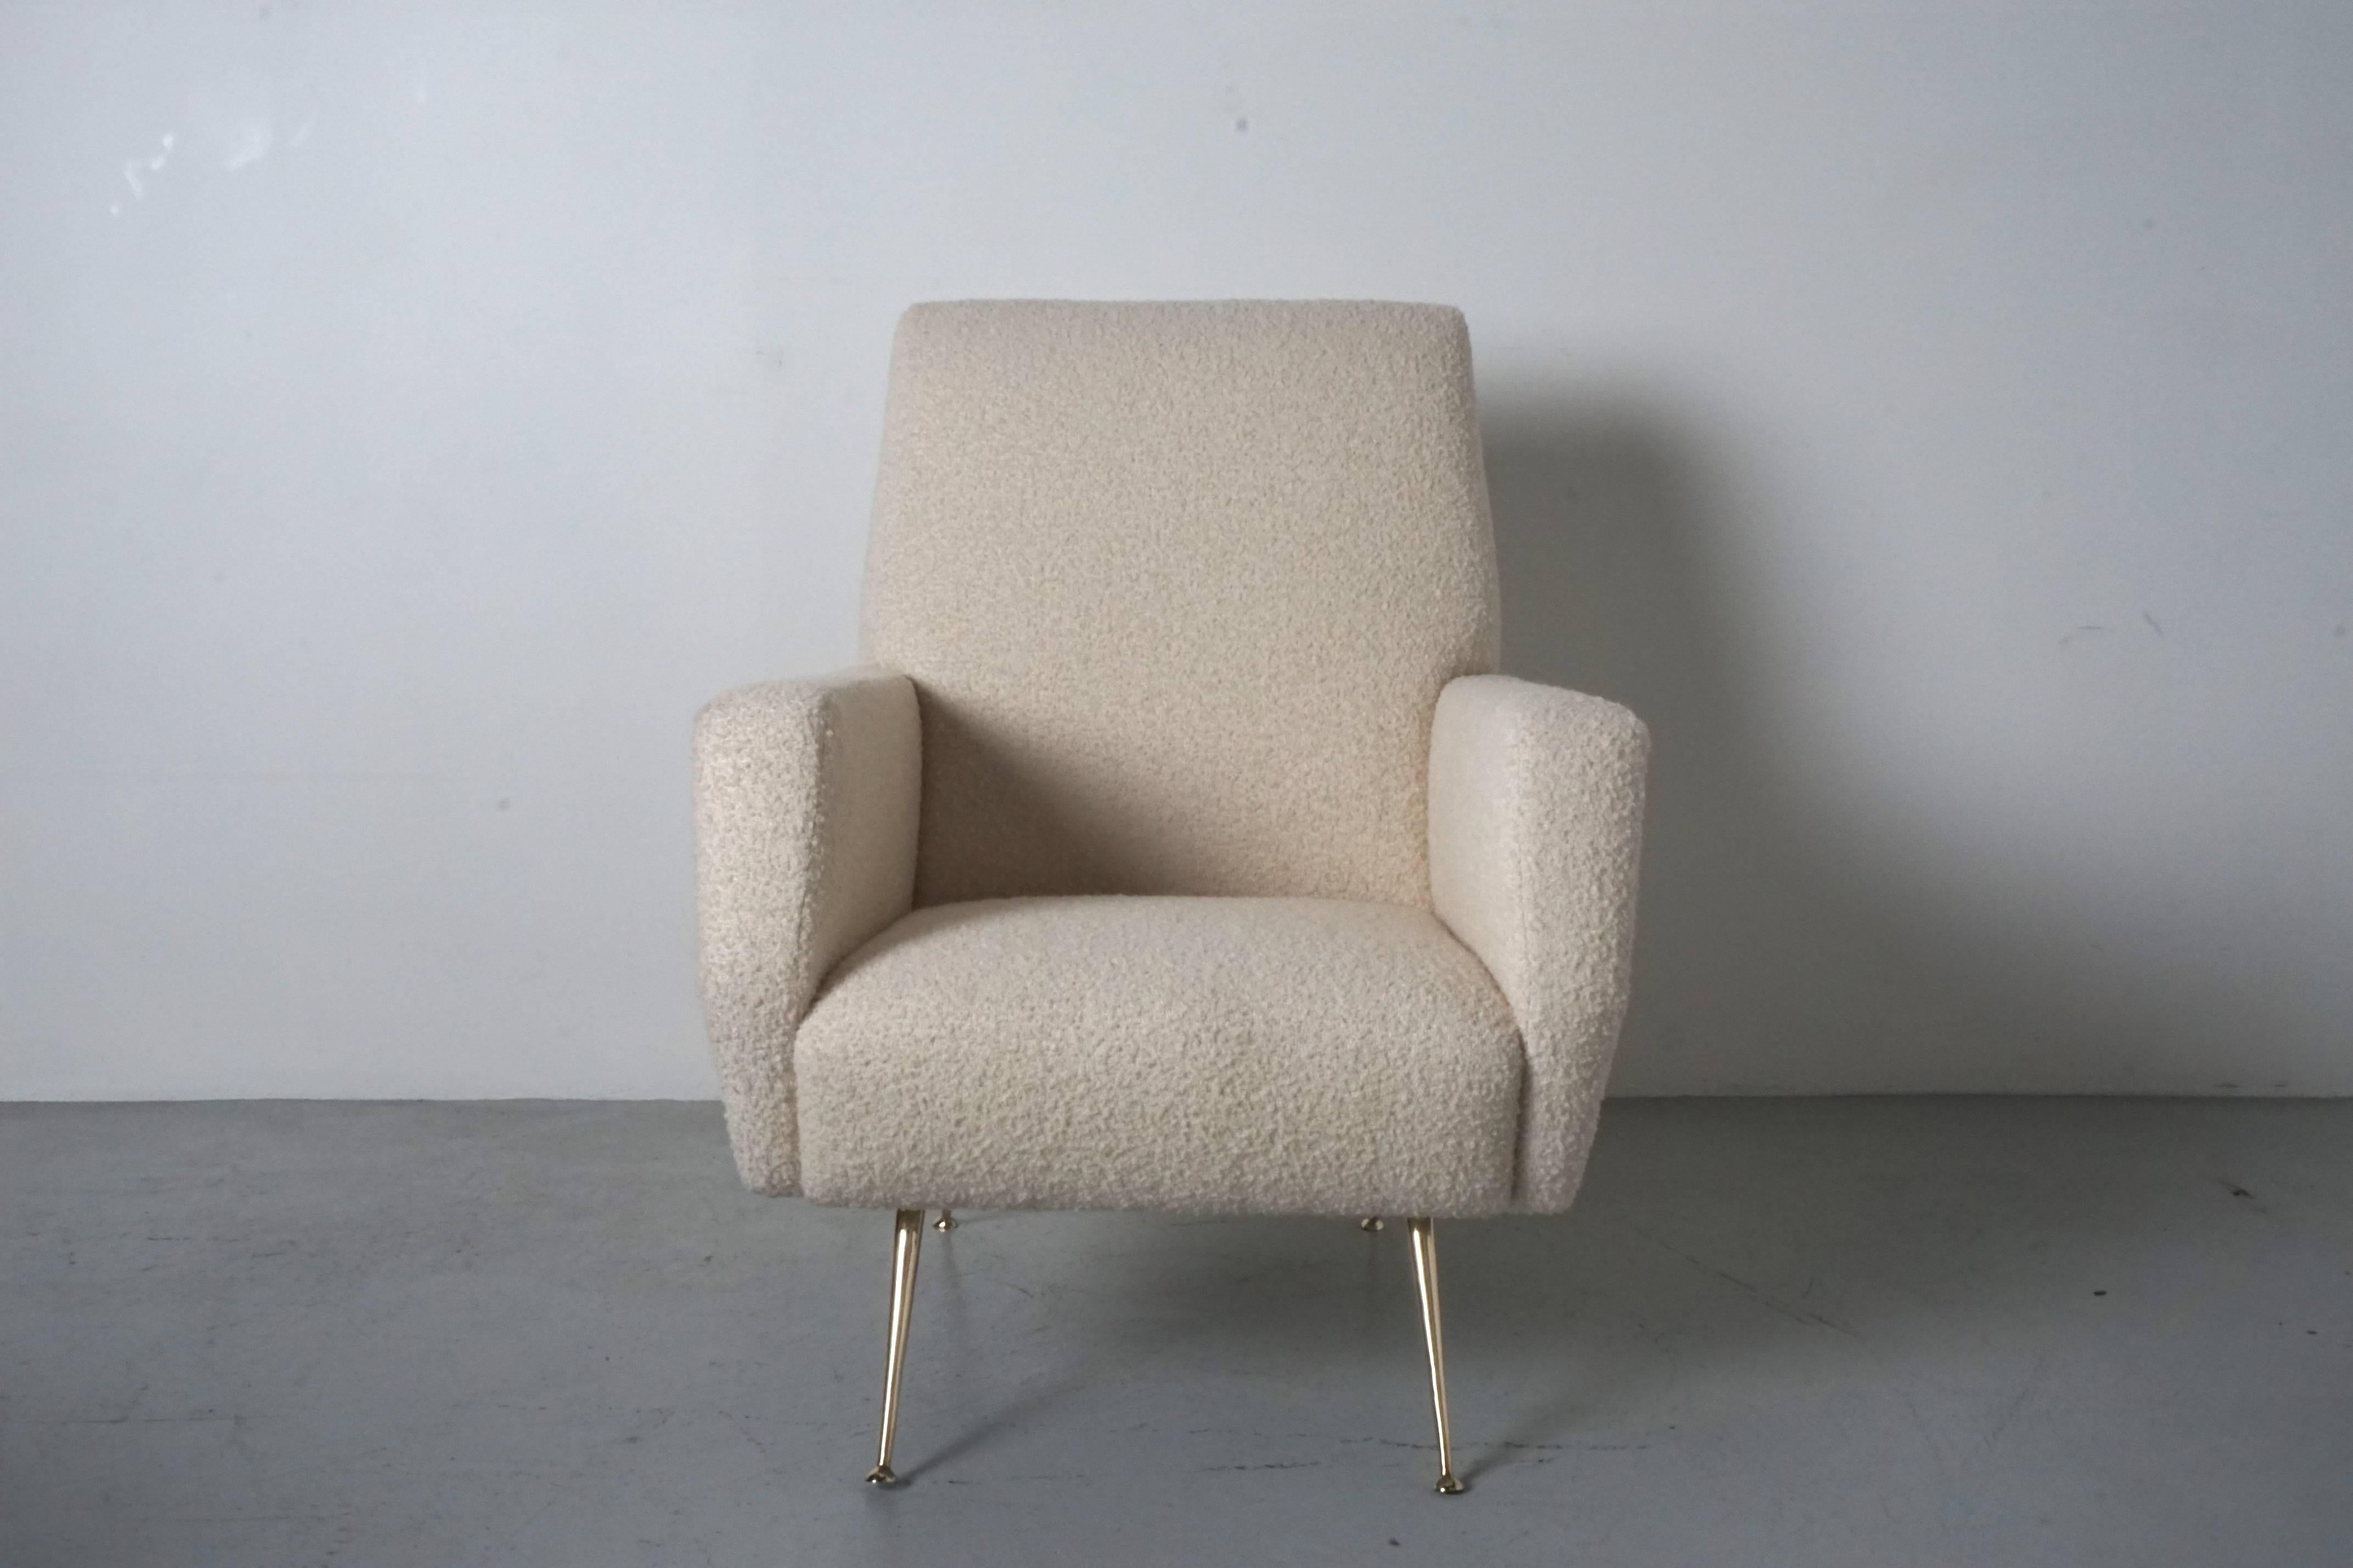 Pair of Italian armchairs with wonderful shape and angled arms. Newly reupholstered in a soft, creamy white wool bouclé́. Newly polished brass legs.